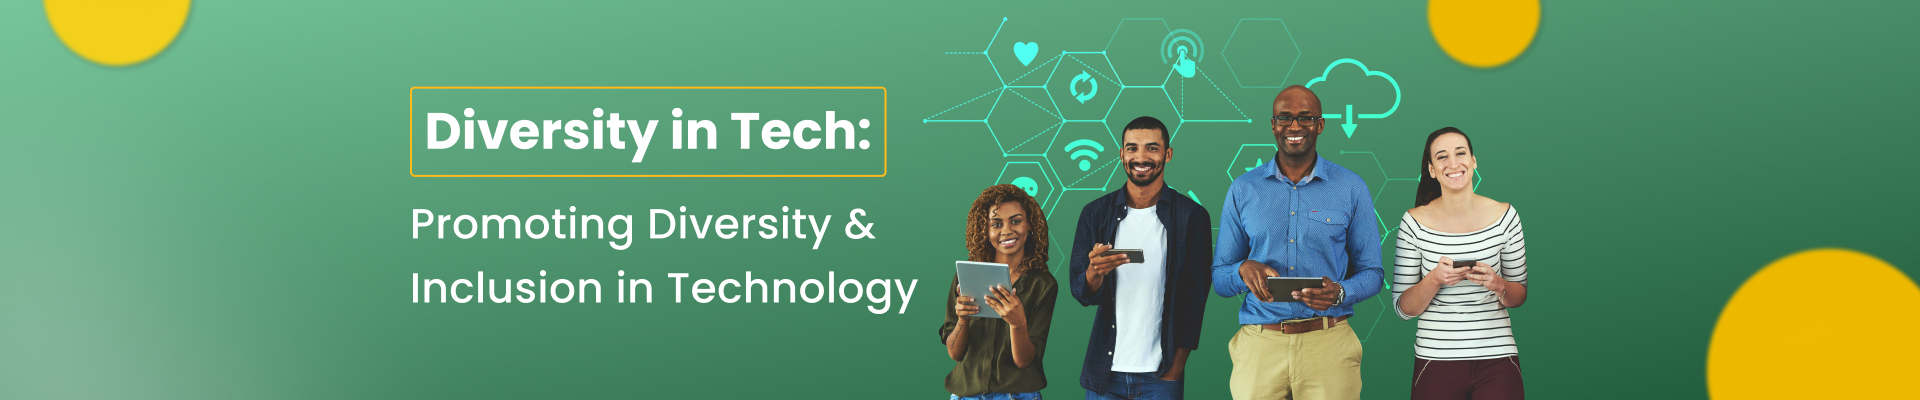 Diversity in Tech: Promoting Diversity & Inclusion in Technology